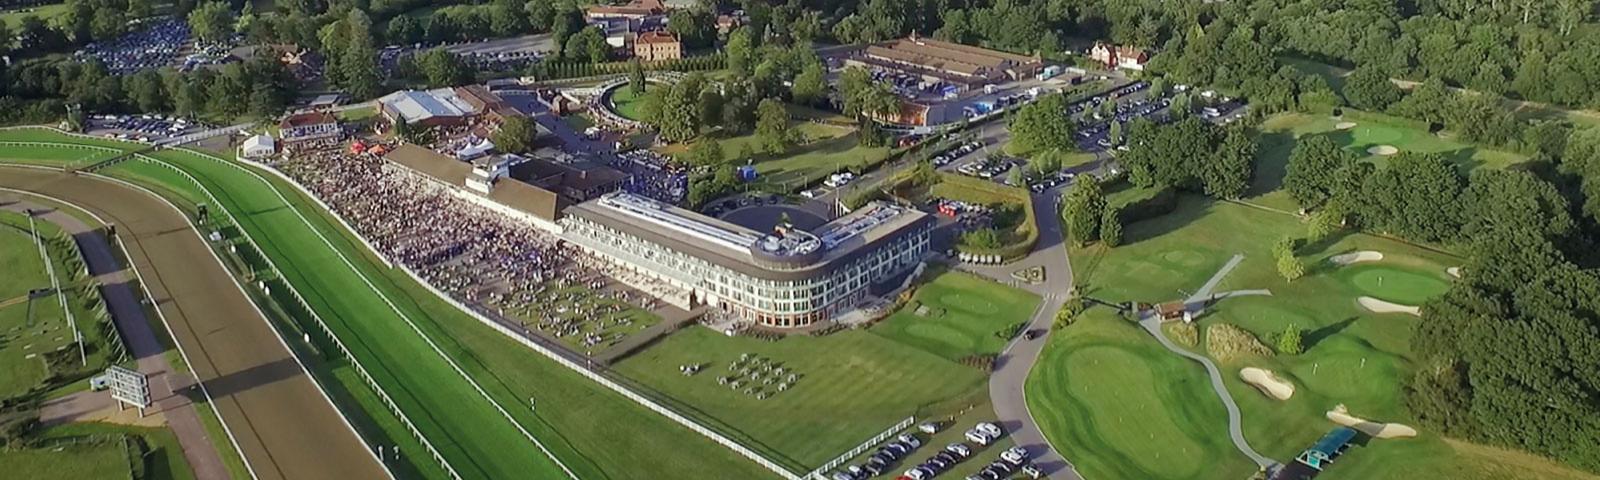 An arial view of an ARC Racecourse